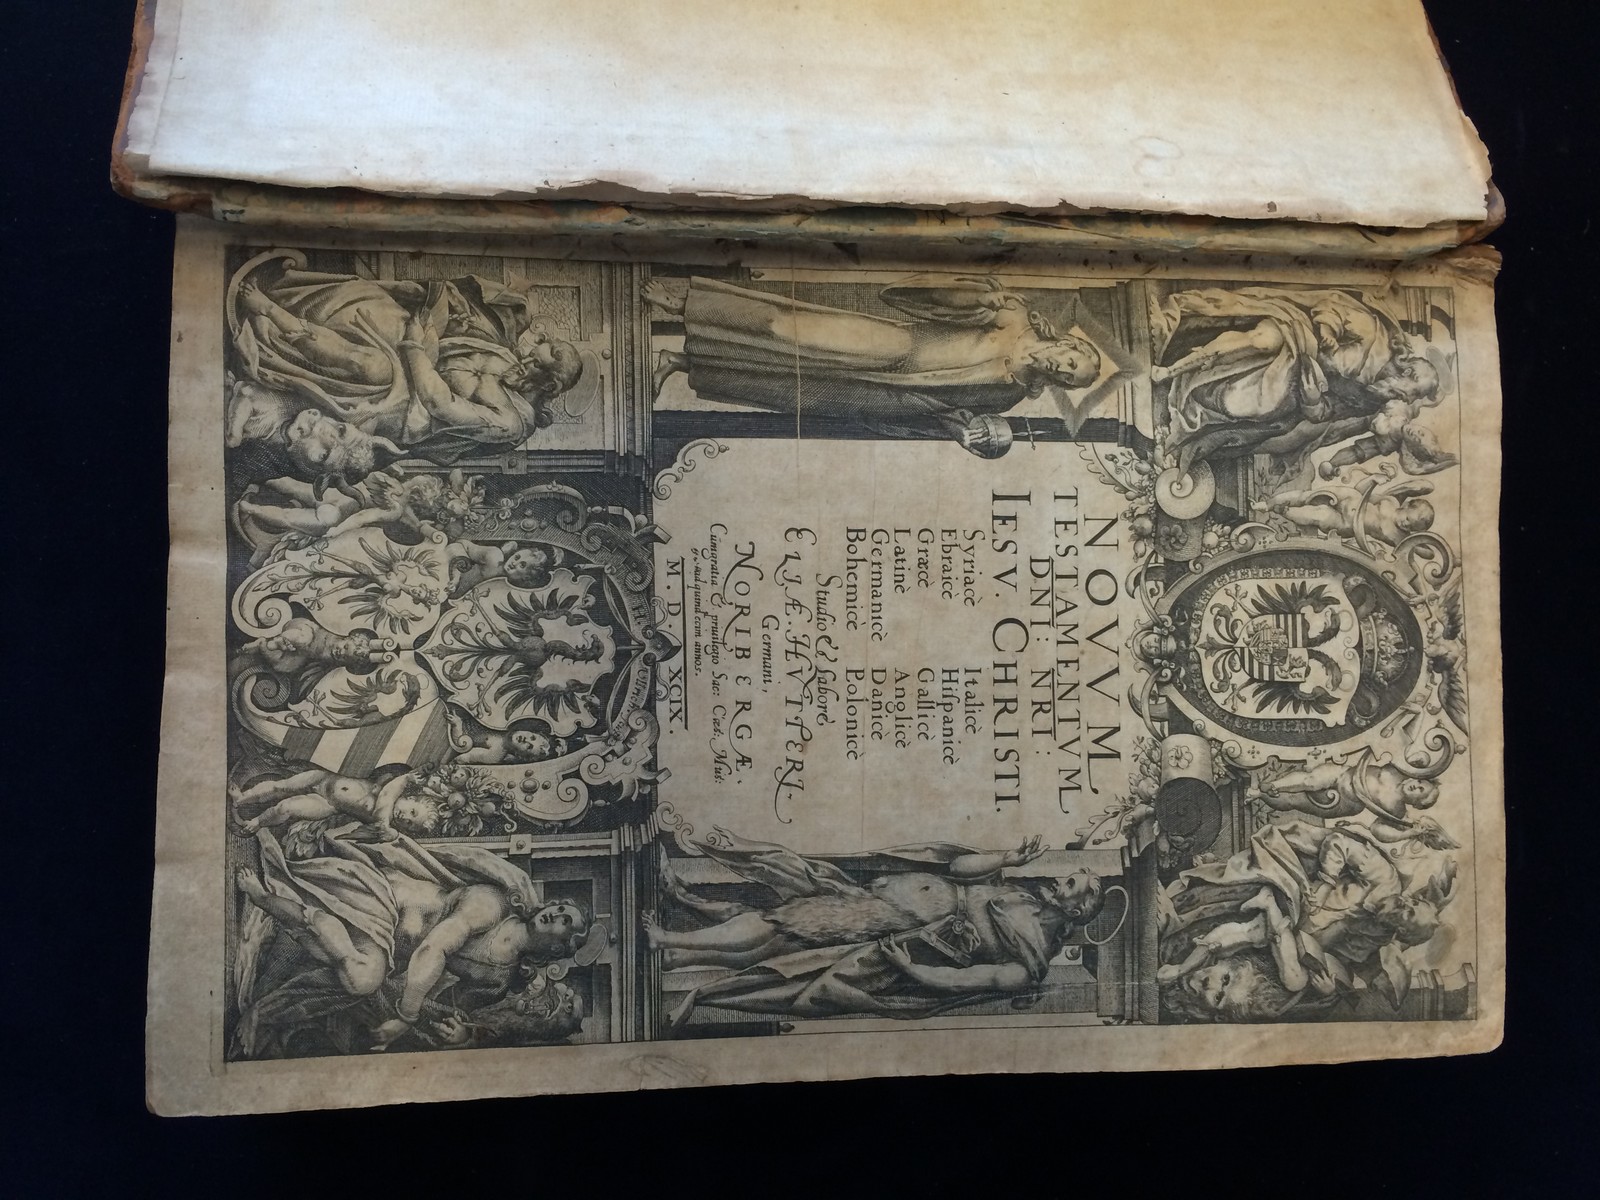 "The Elias Hutter Polyglot Bible" - both volumes, first edition printed 1599.  The New Testament